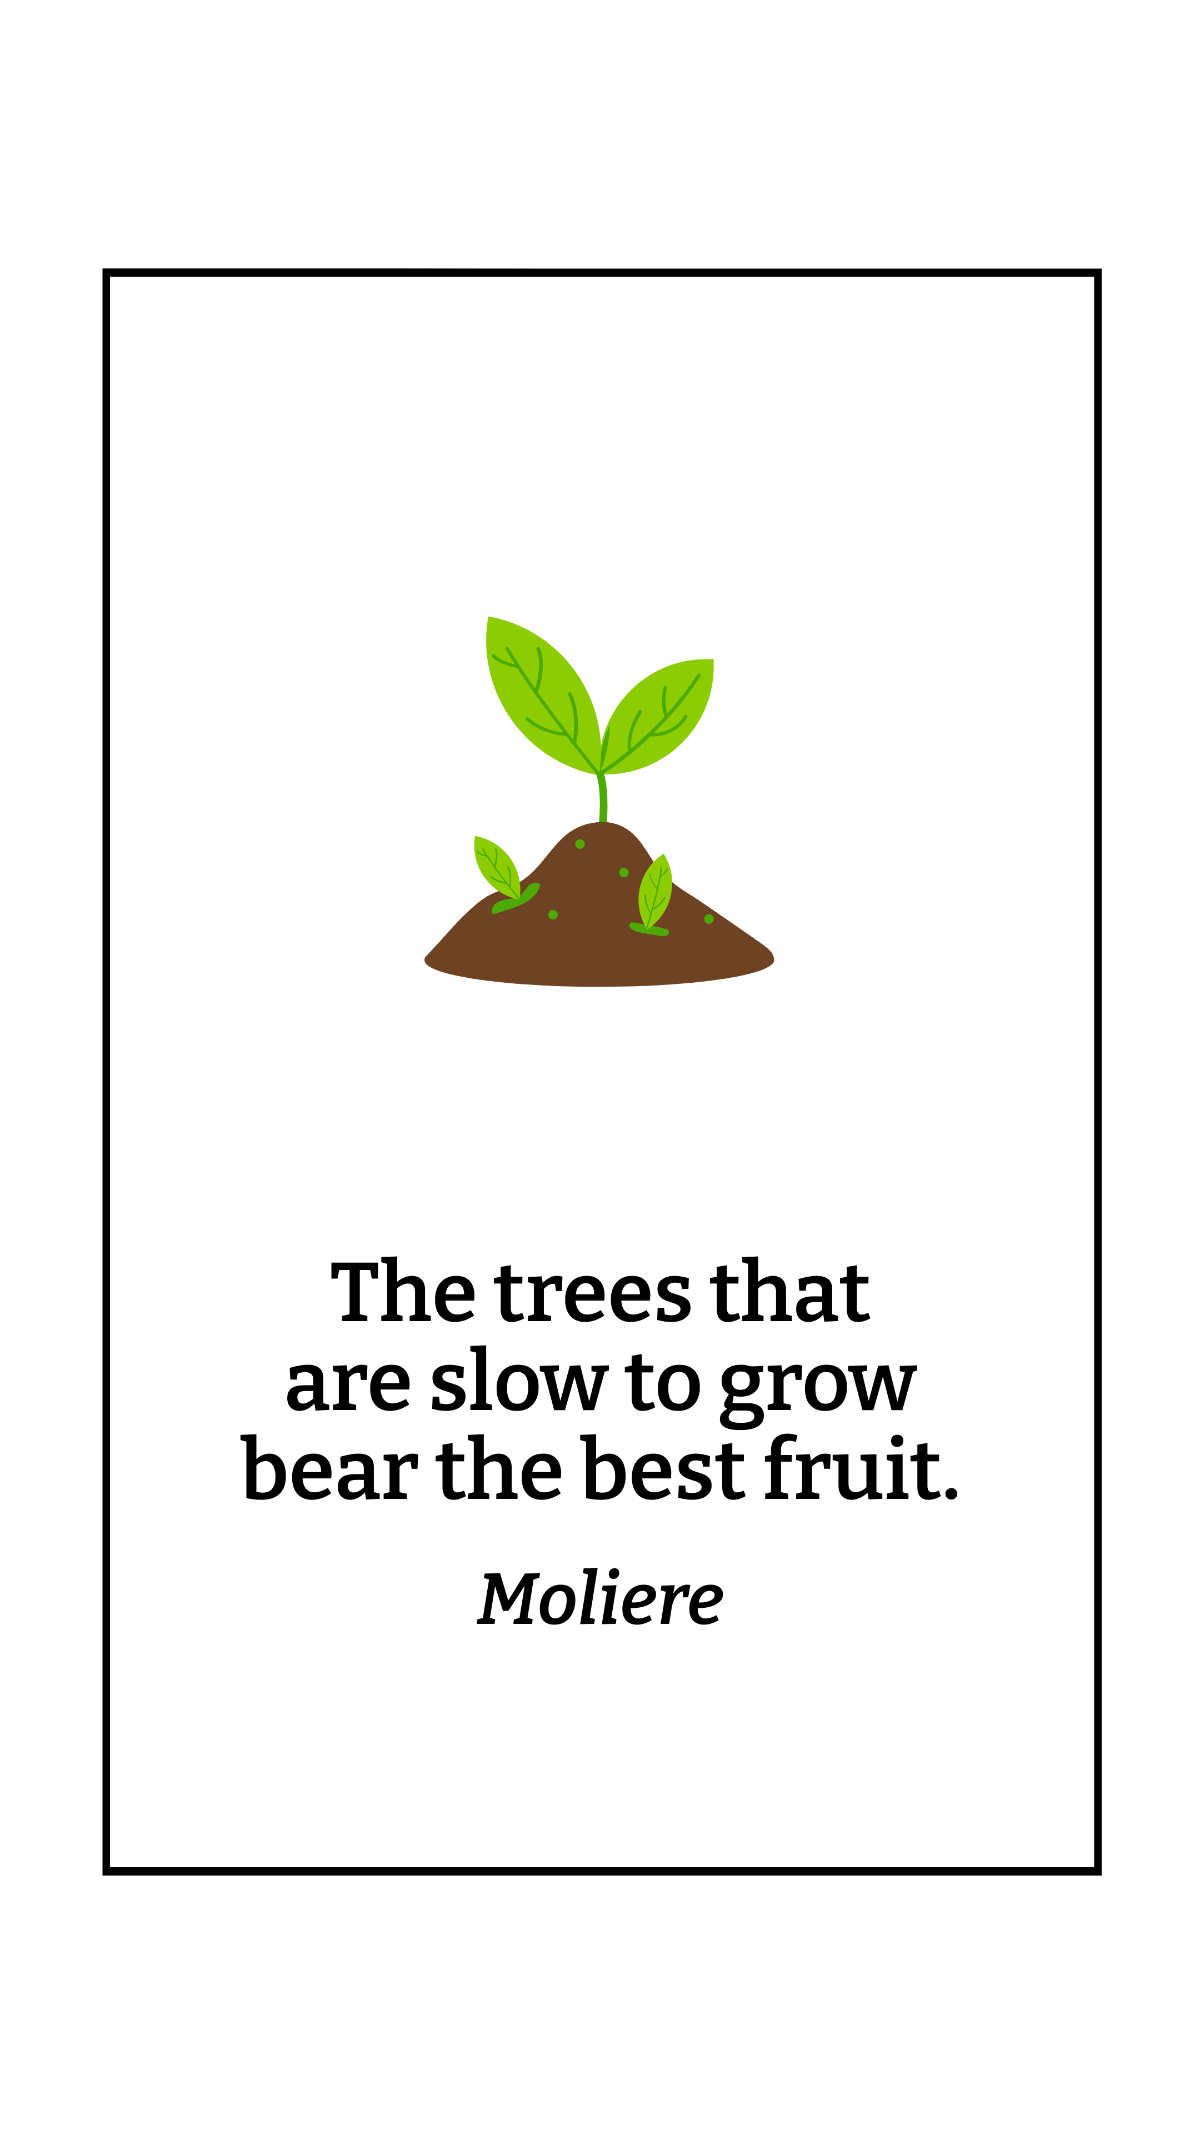 Free Moliere - The trees that are slow to grow bear the best fruit. Template